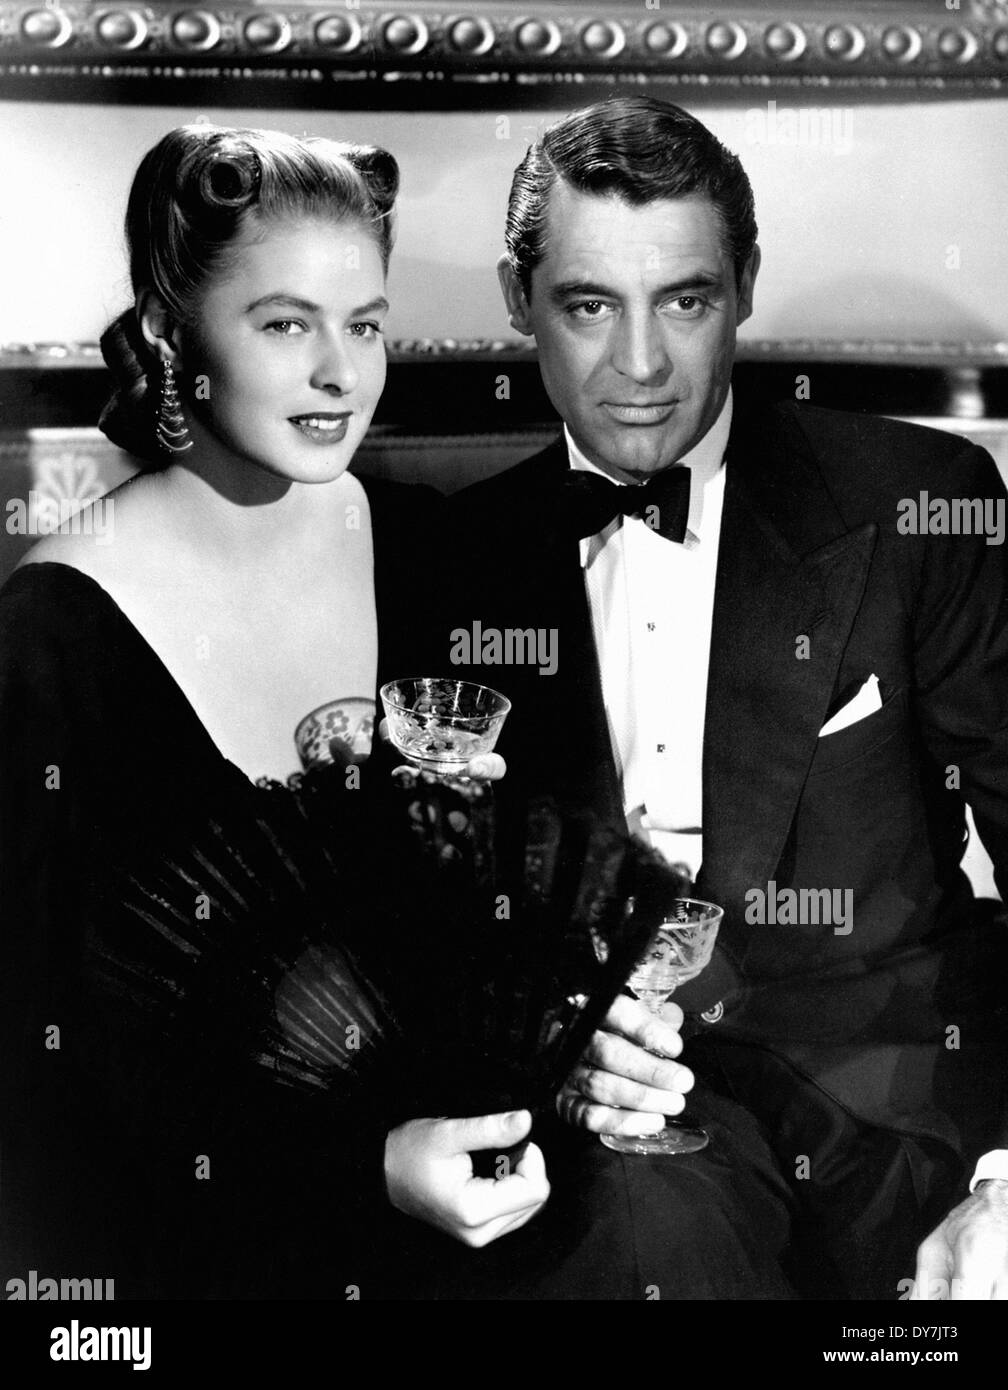 NOTORIOUS - Cary Grant, Ingrid Bergman - Directed by Alfred Hitchcock - RKO - 1946 Stock Photo